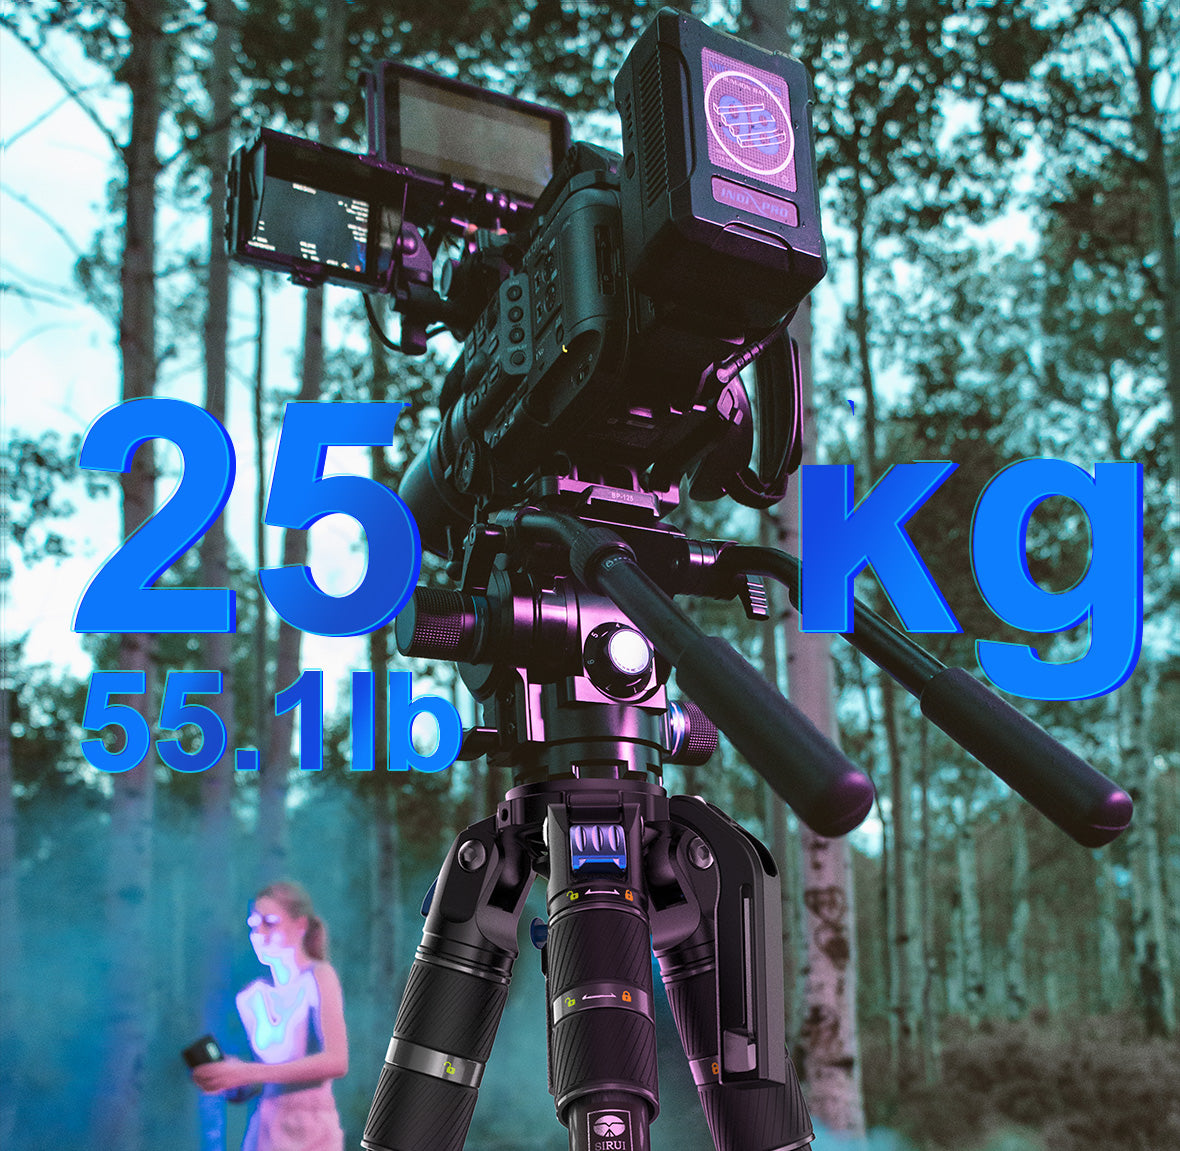 Carbon fiber construction tripod legs with a maximum weight capacity of 25 kg